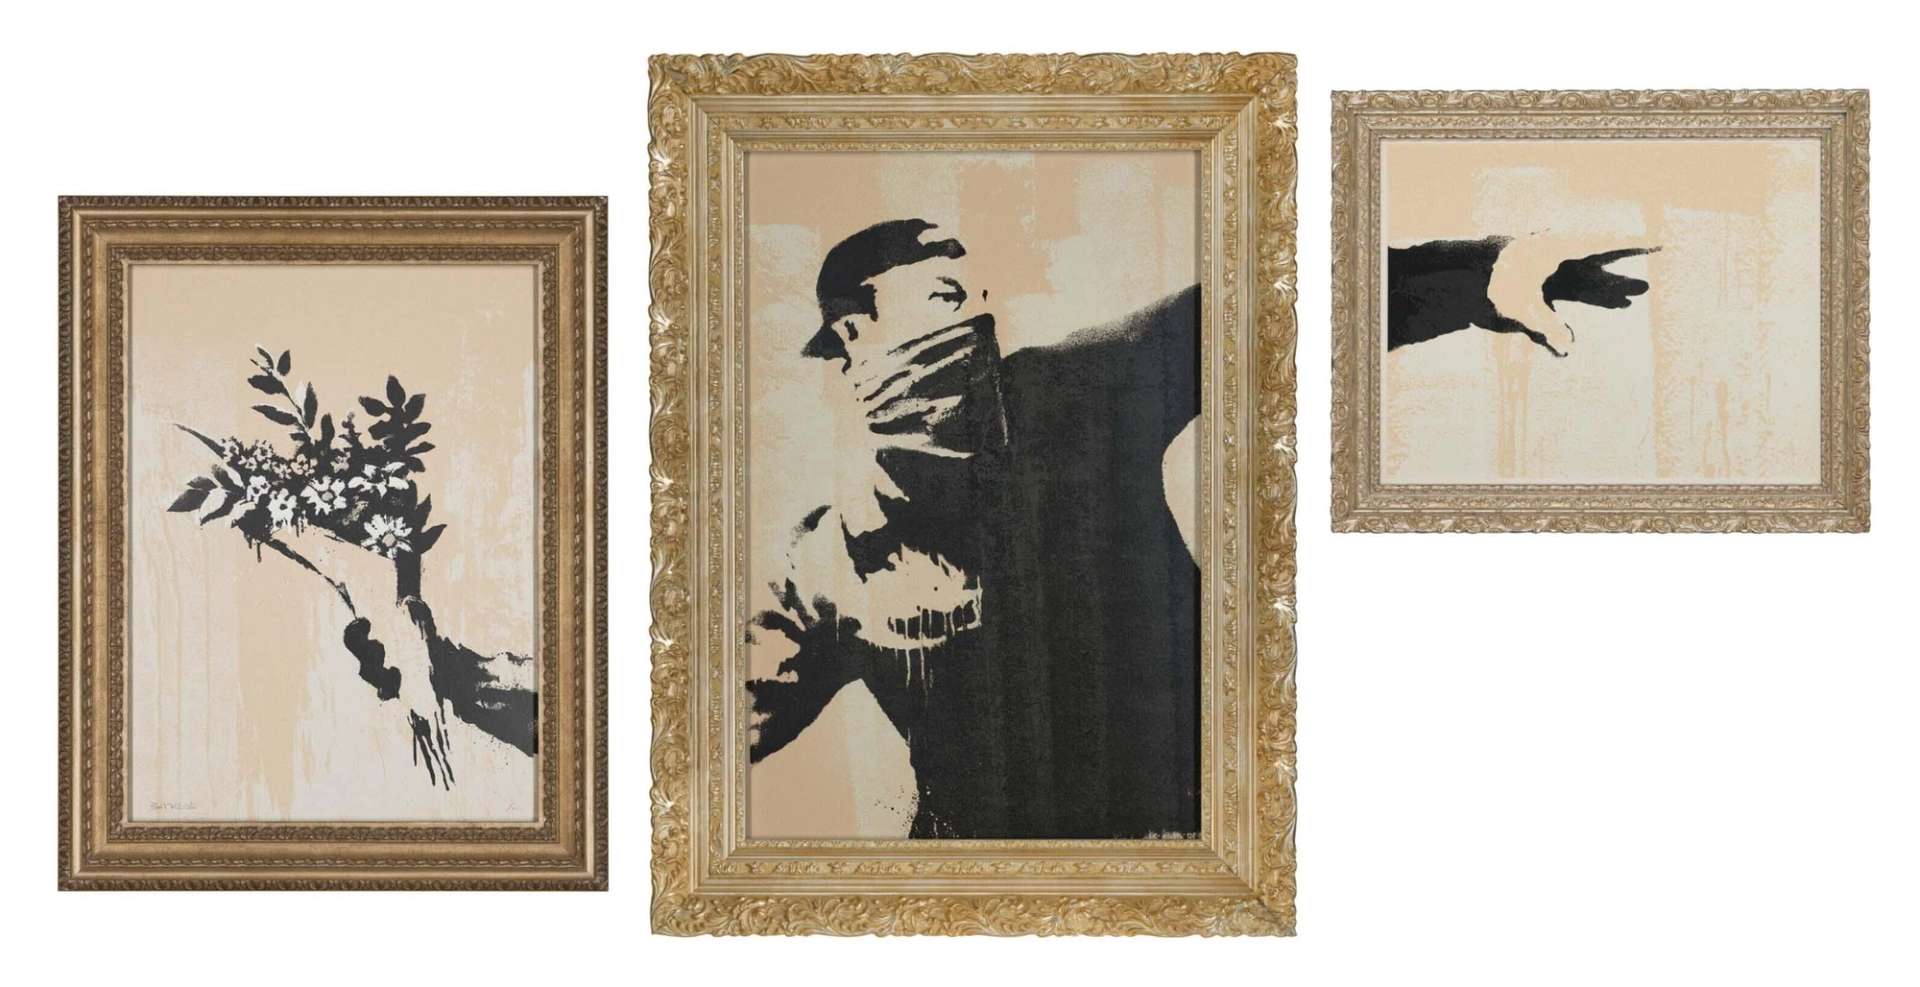 A triptych screenprint in gold frames by Banksy depiction a man about to launch a bunch of flowers, spread across the three panels.